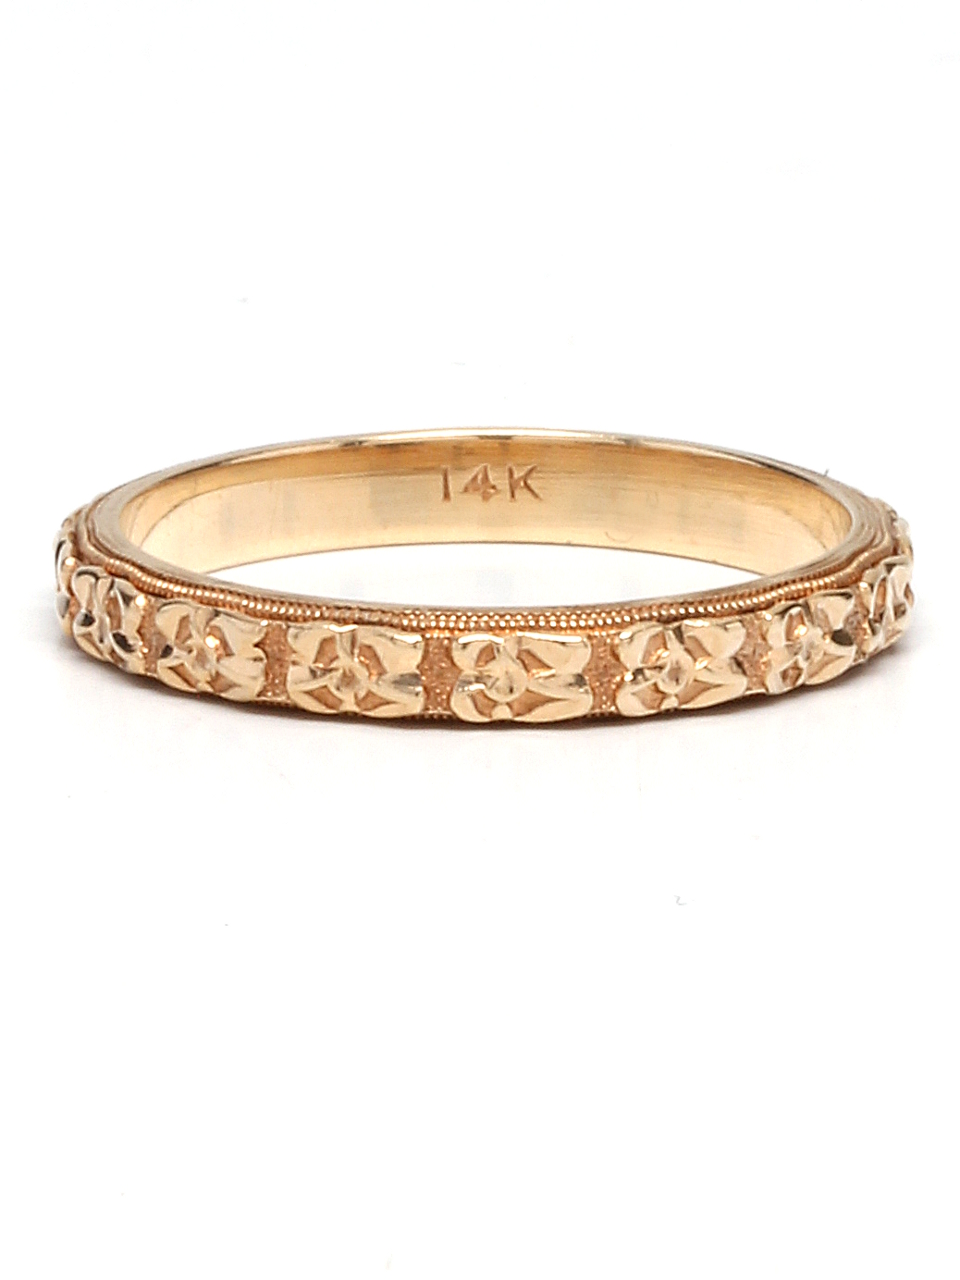 Vintage 14K Yellow Gold Floral 3mm Band circa 1940’s